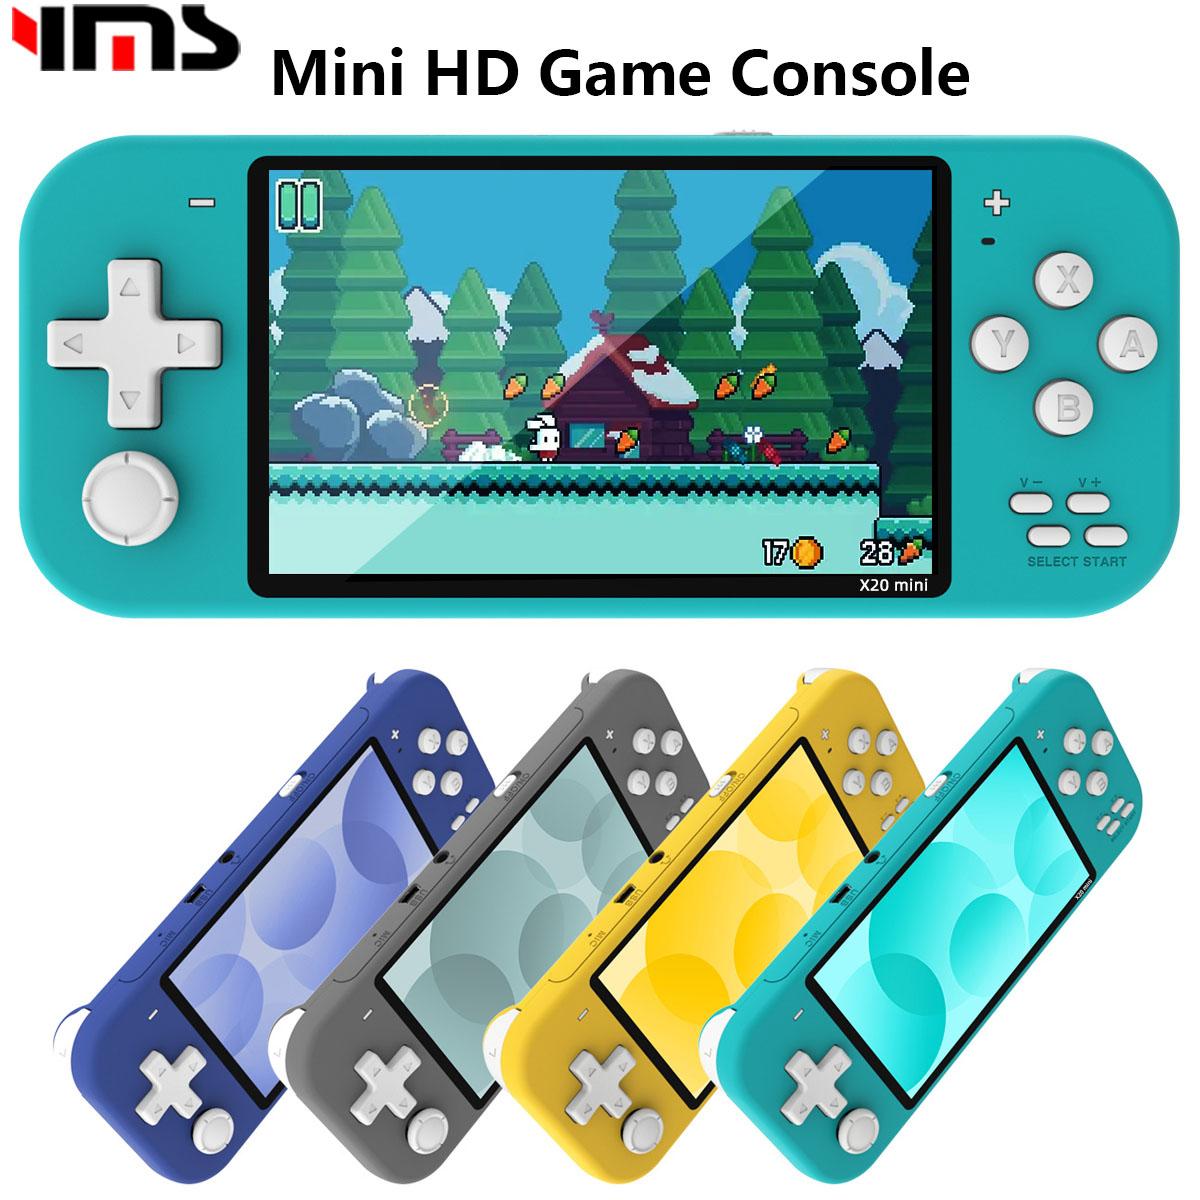 Essager Electronic Mini Video Game Console 4.3" Built-in 1000 Games Portable Retro Video Game Console Support Ps1/cps1/gba/gb/gbc/md/nes/fc/mame